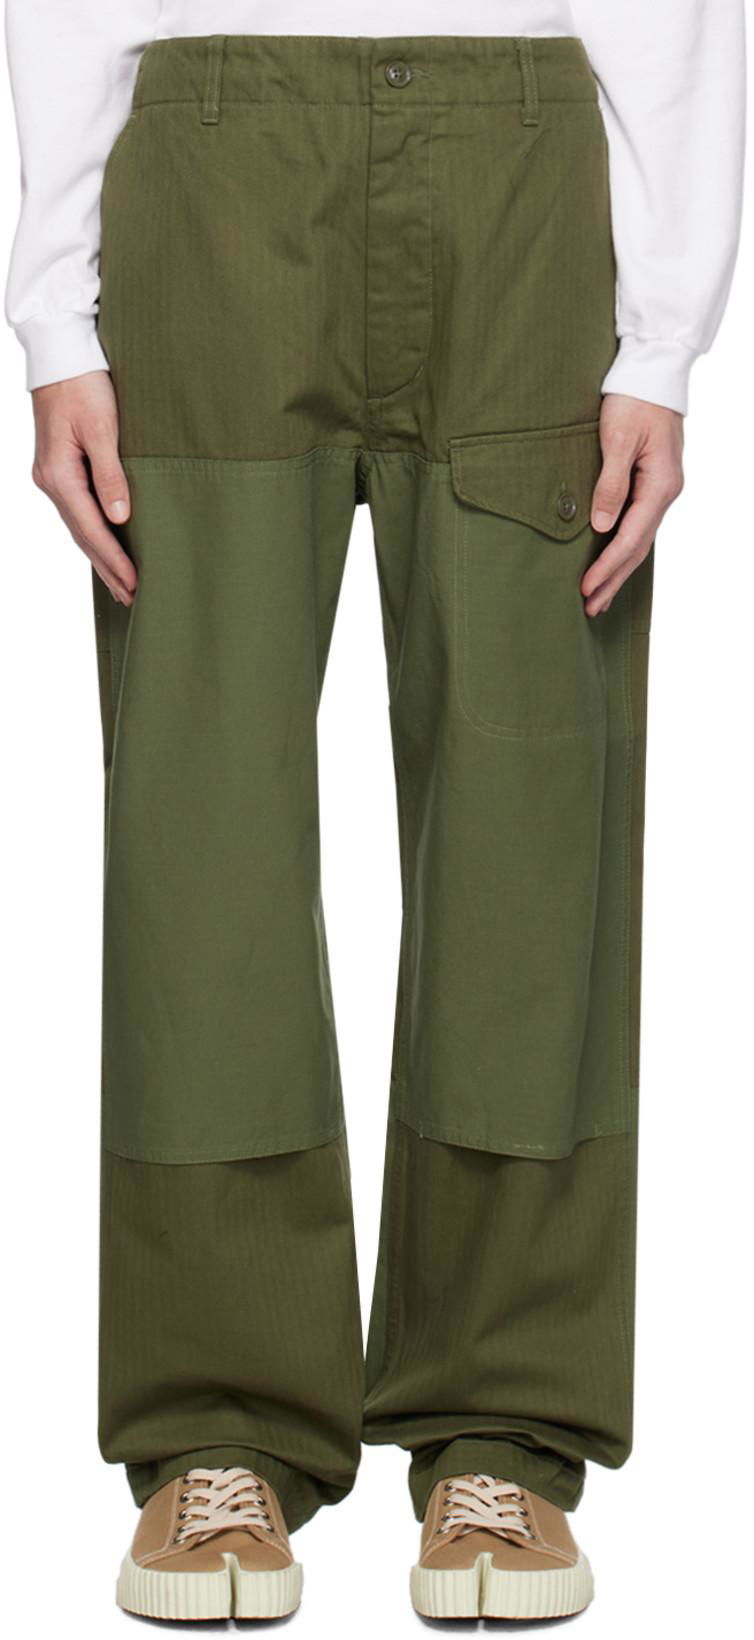 Green Field Cargo Pants by ENGINEERED GARMENTS